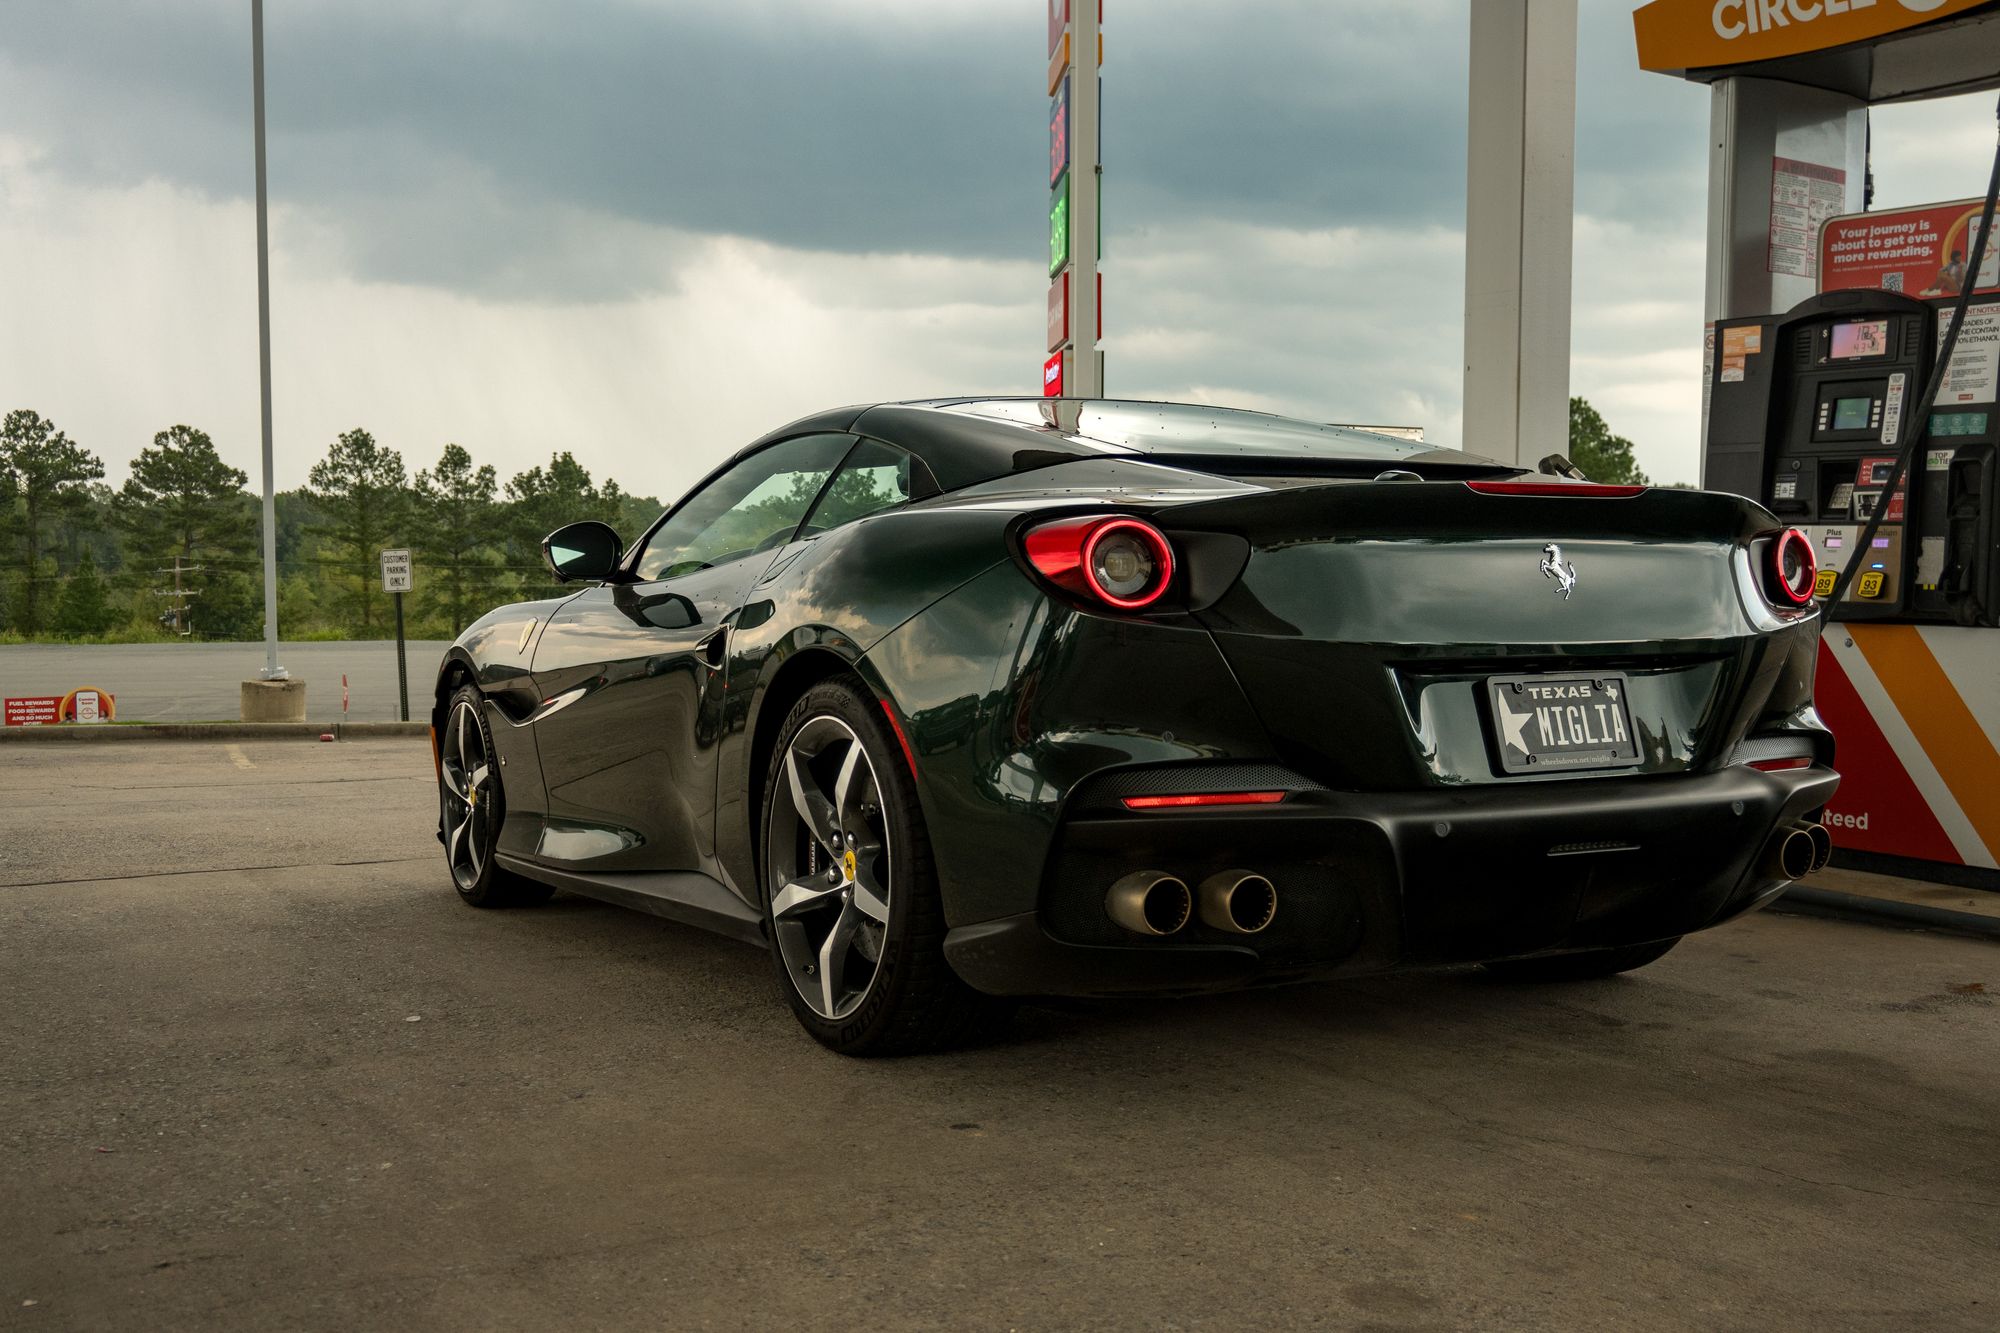 The Portofino sits, getting fuel. Dramatic reflections show the curves and angles of the vehicle.